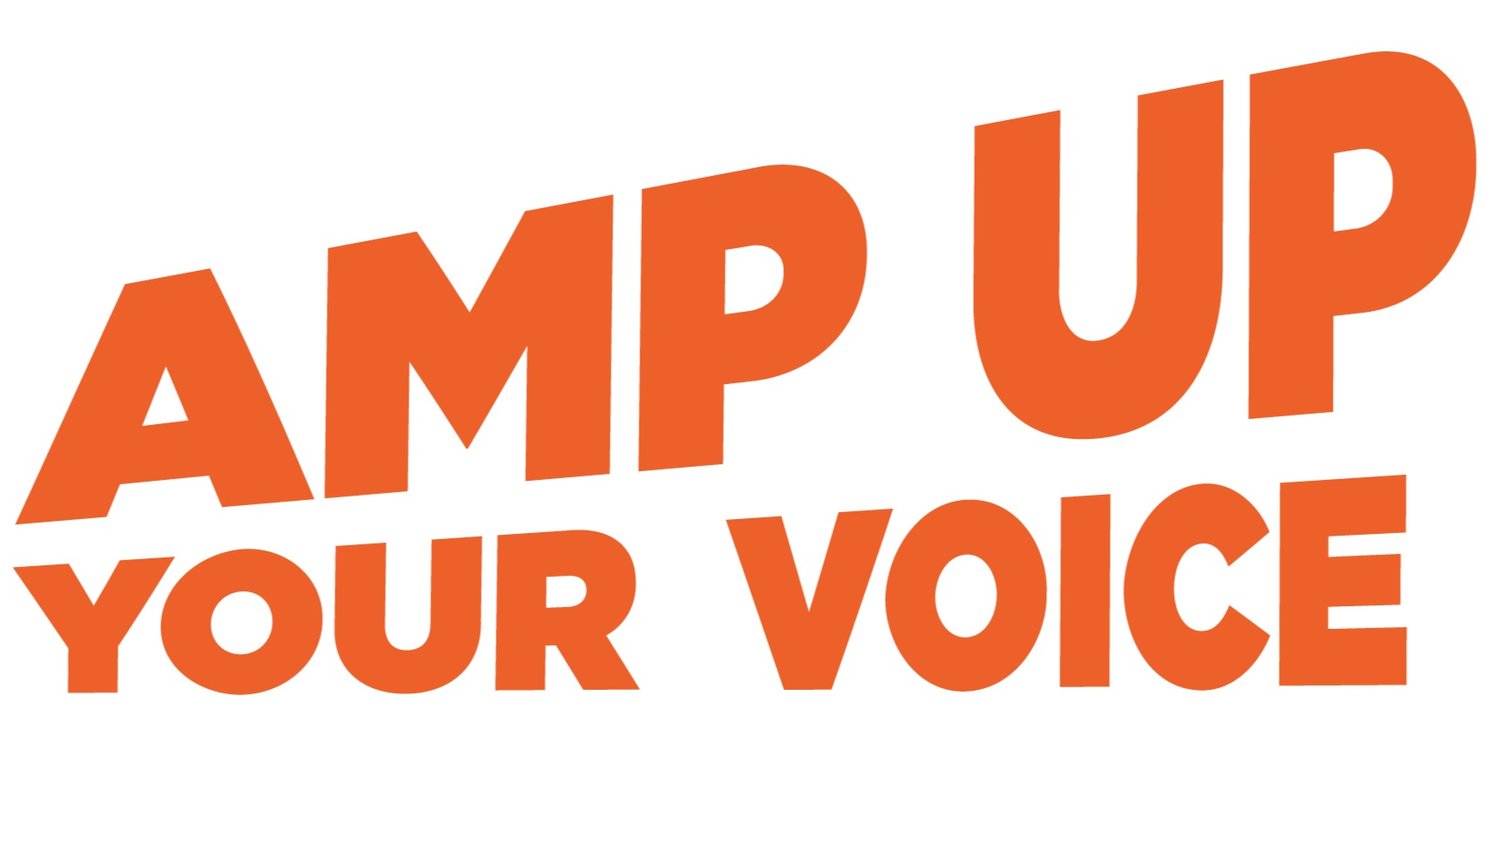 Amp Up Your Voice